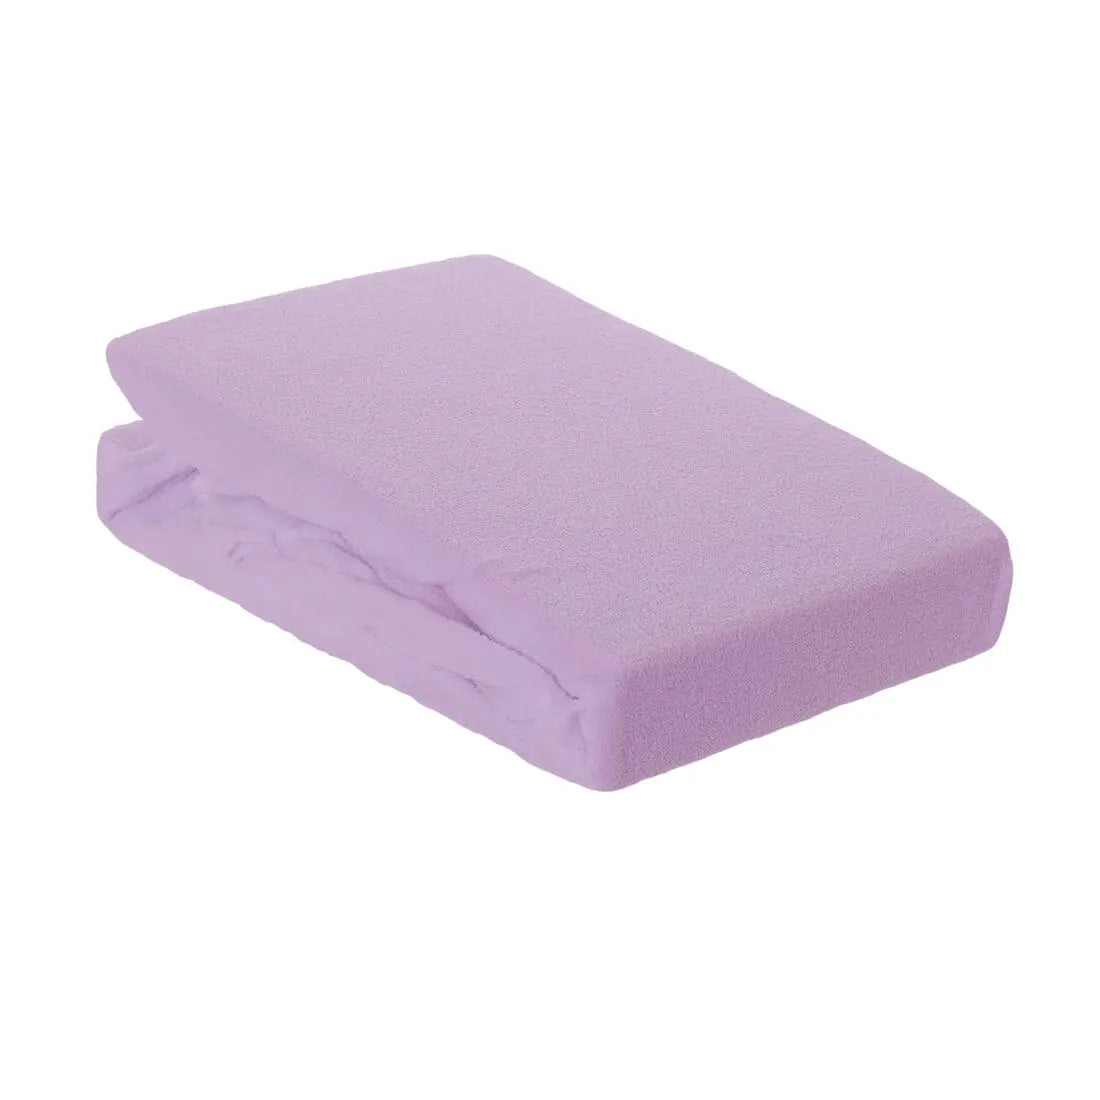 Aztex Classic Value Massage Couch Cover Lilac With Face Hole 